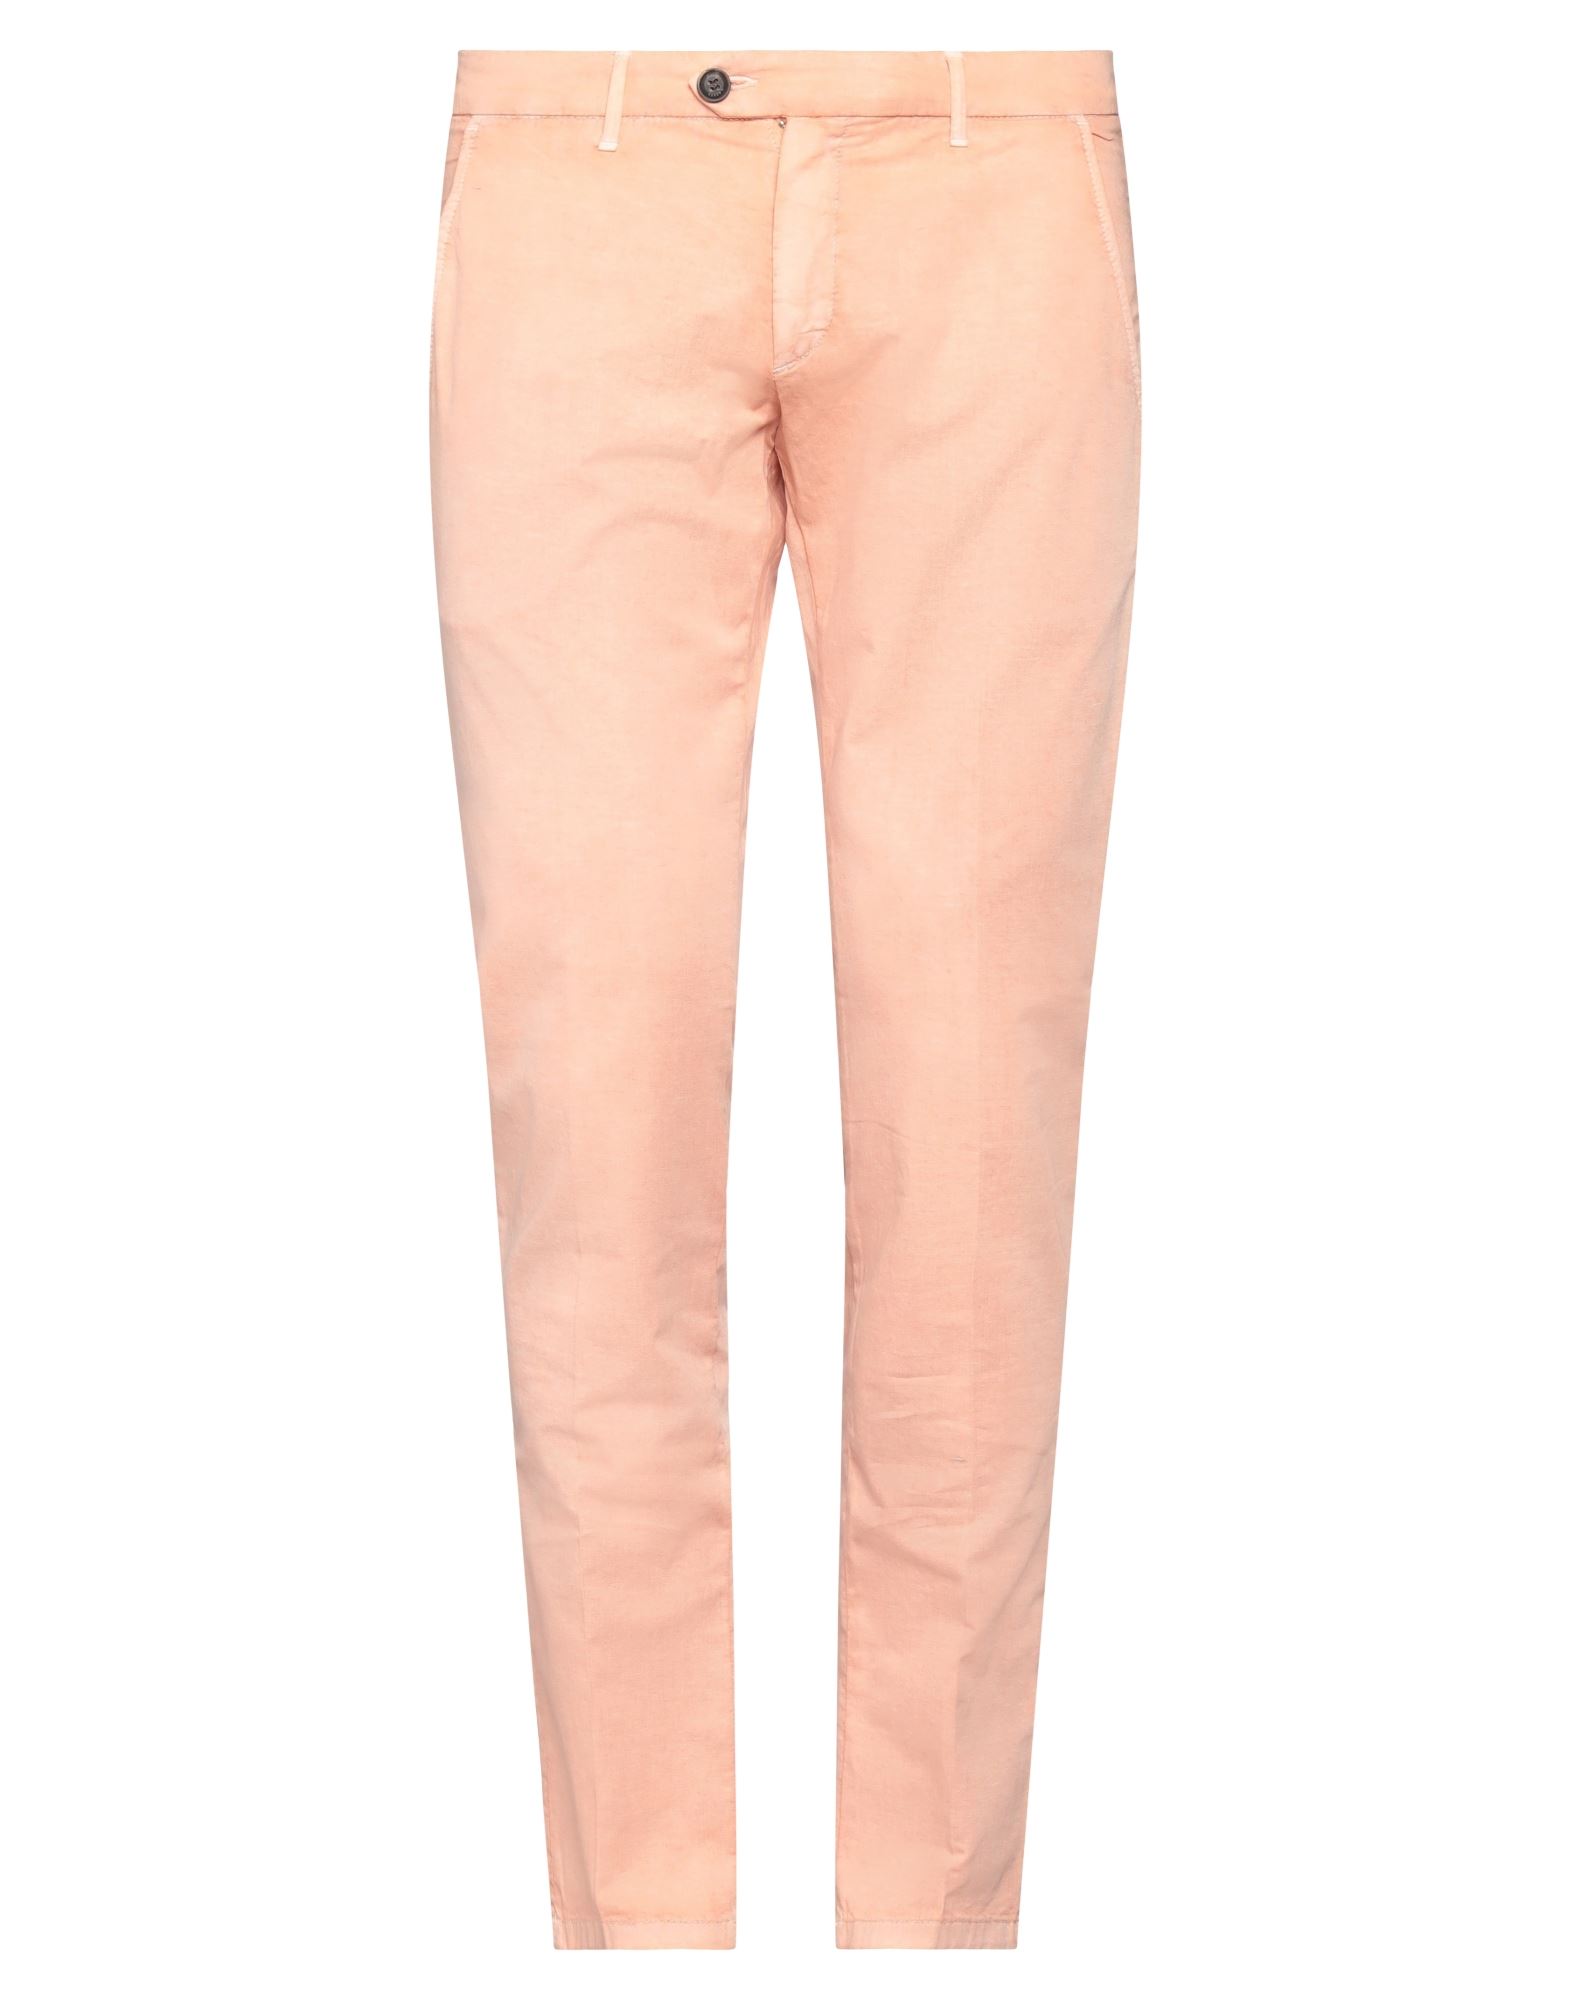 Roy Rogers Pants In Pink